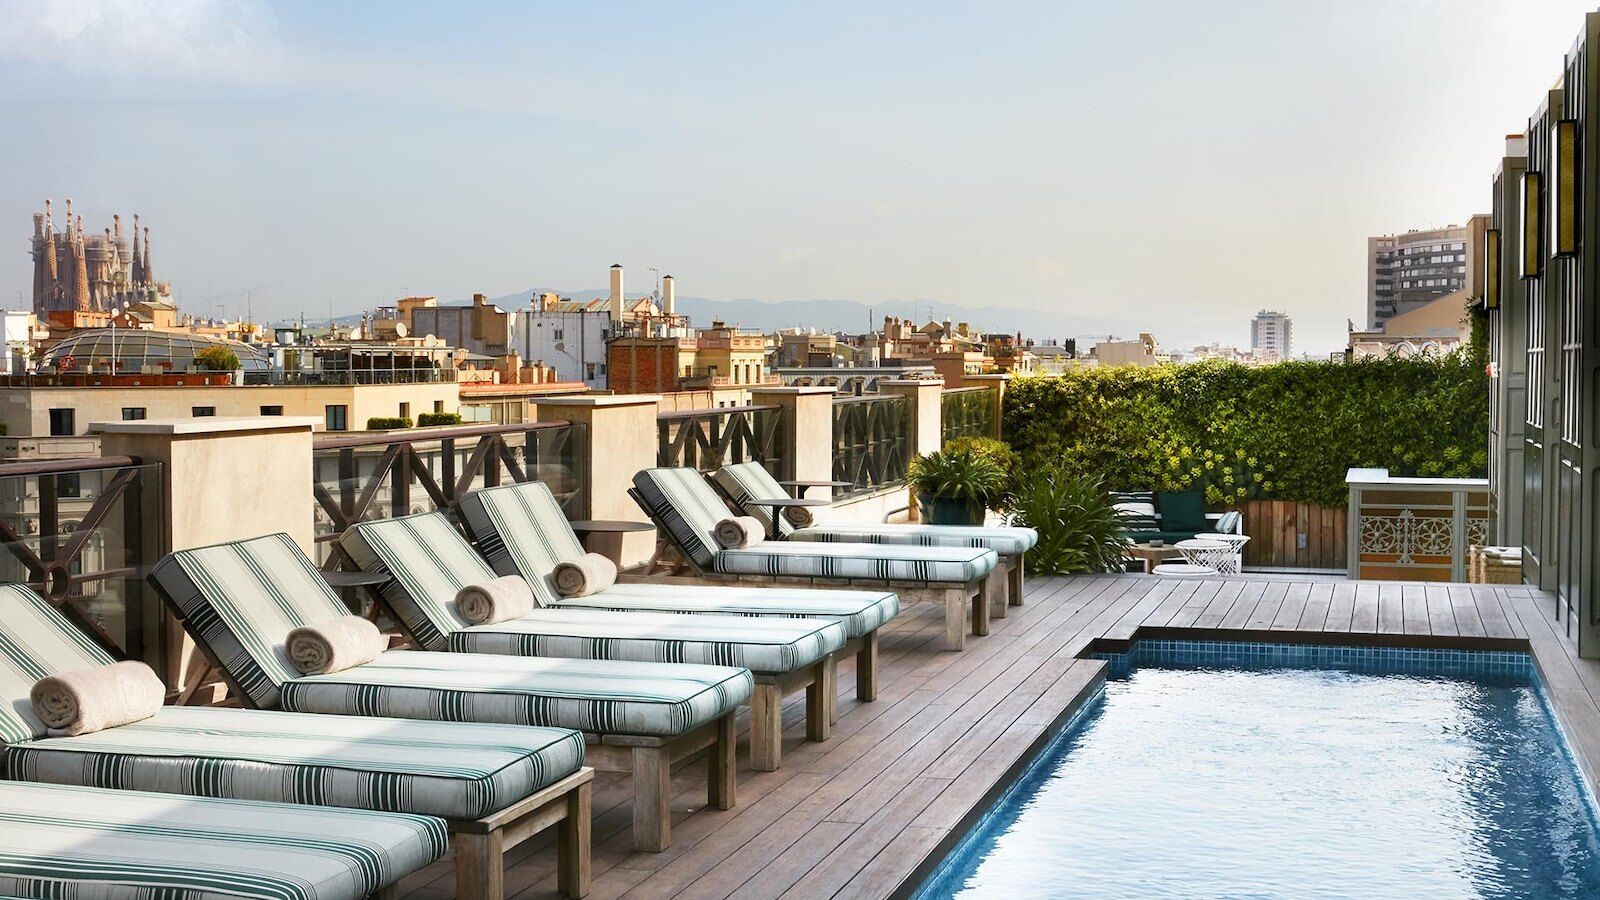 parks in barcelona - cotton house hotel pool